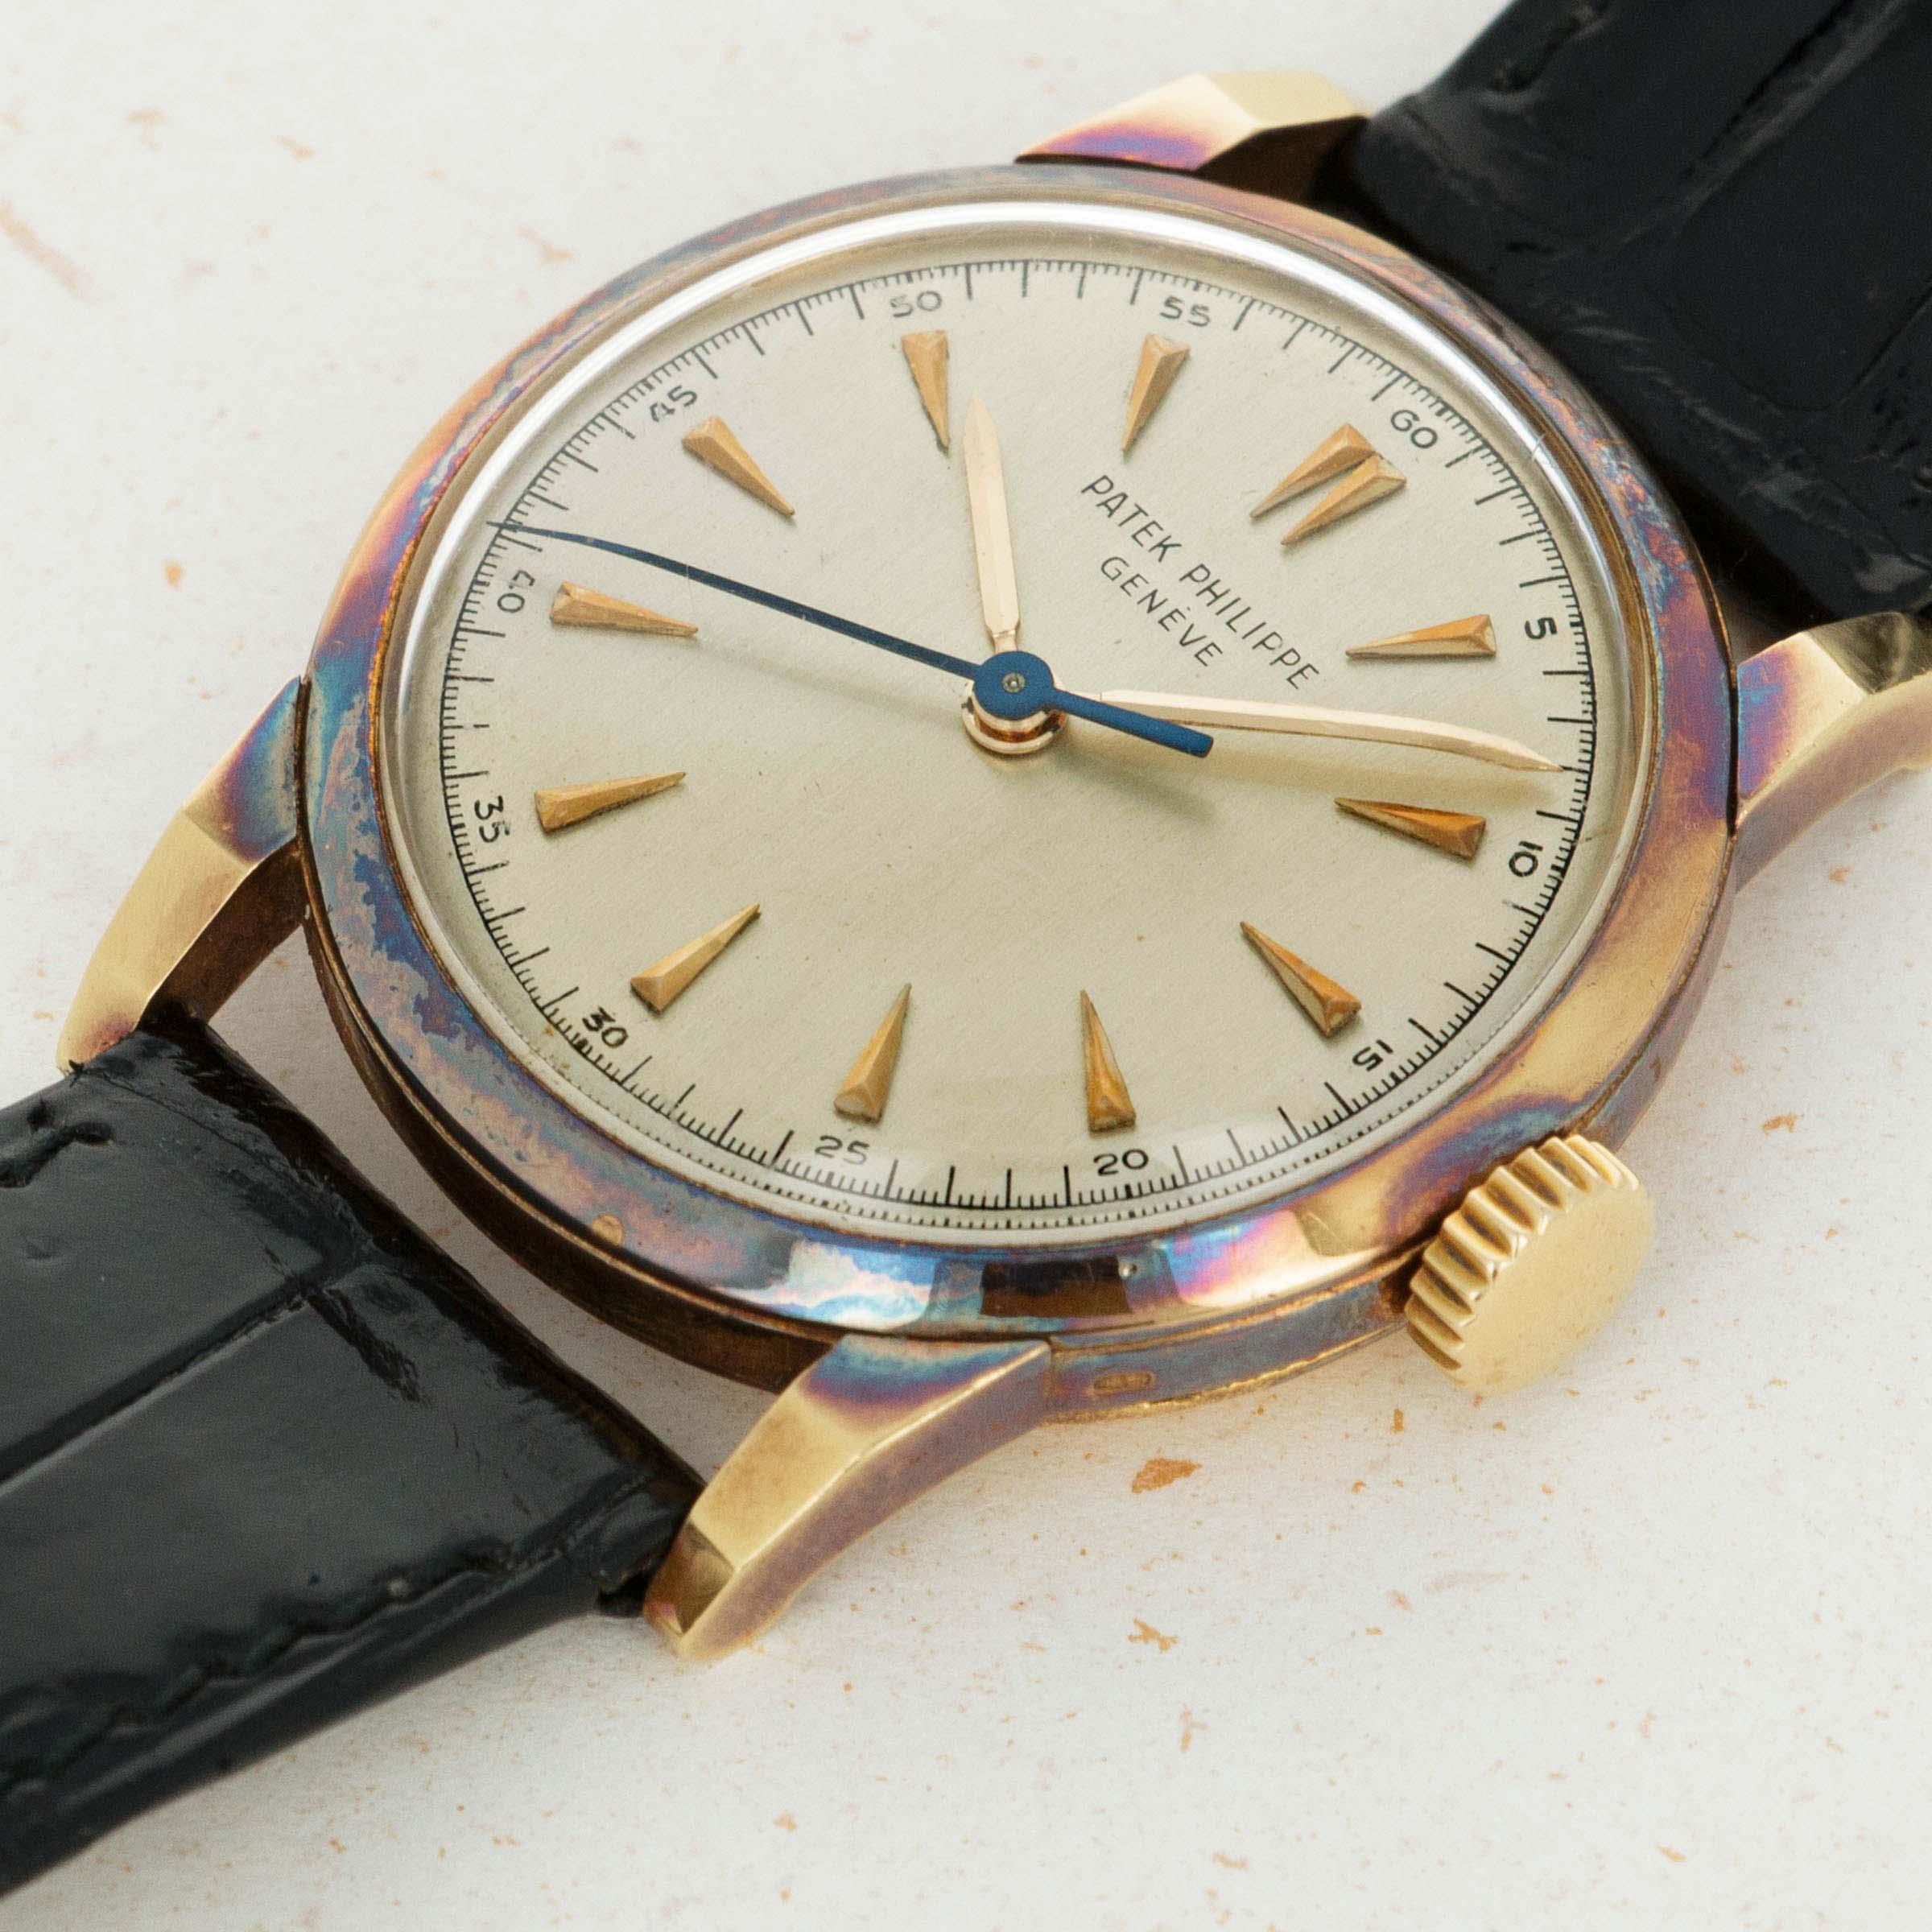 Patek Philippe 18k Yellow Gold Ref. 2460 A10063 | Auctions | Loupe This